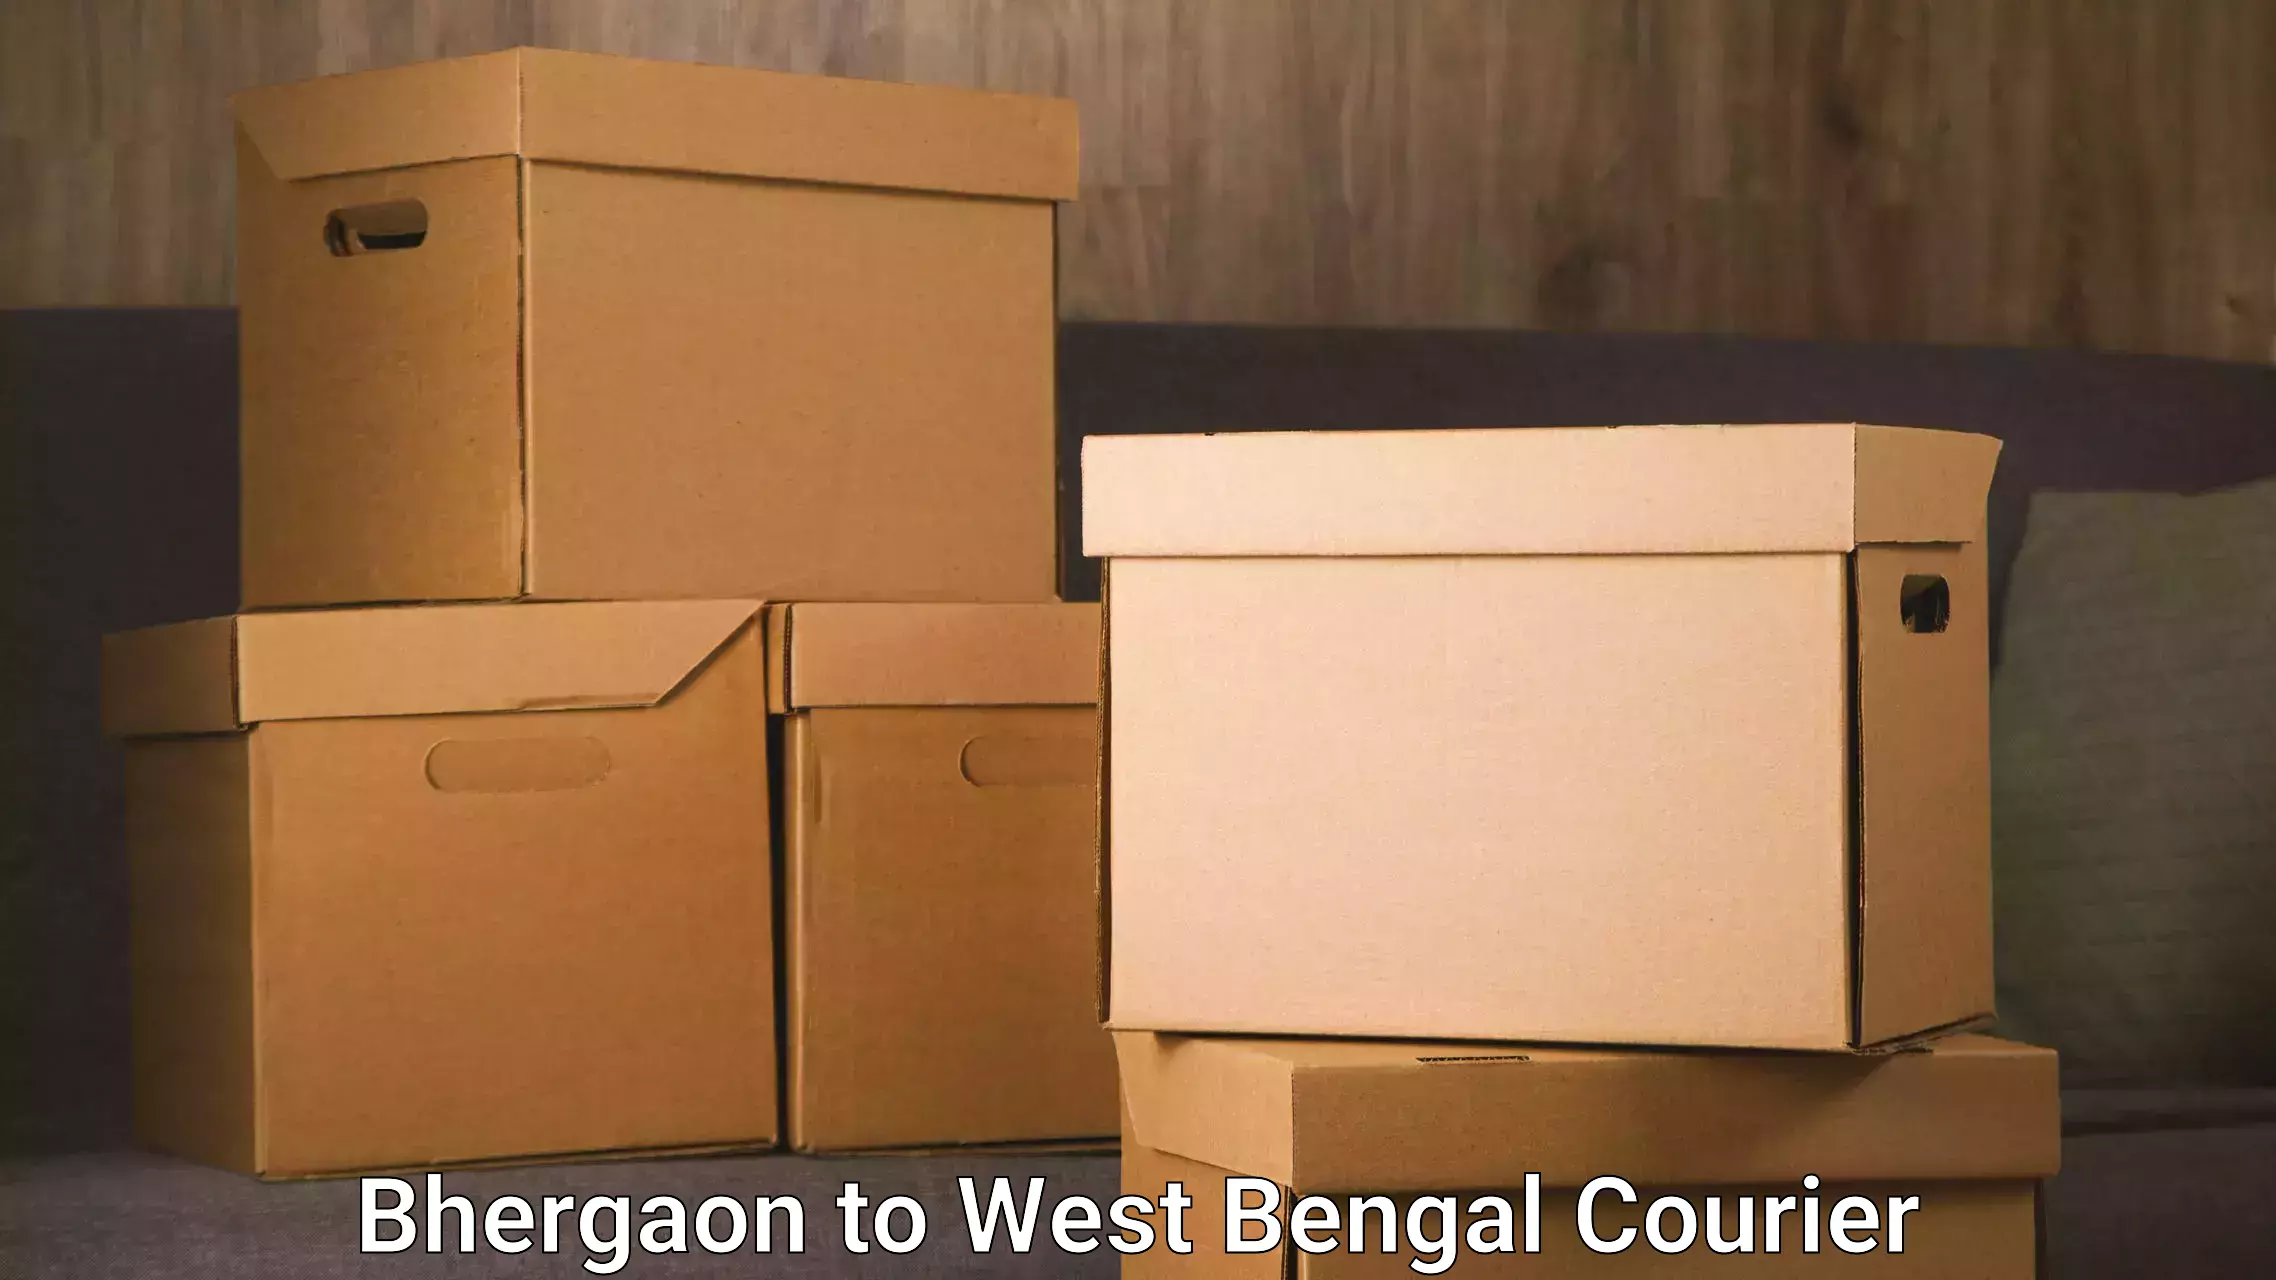 Courier app Bhergaon to West Bengal